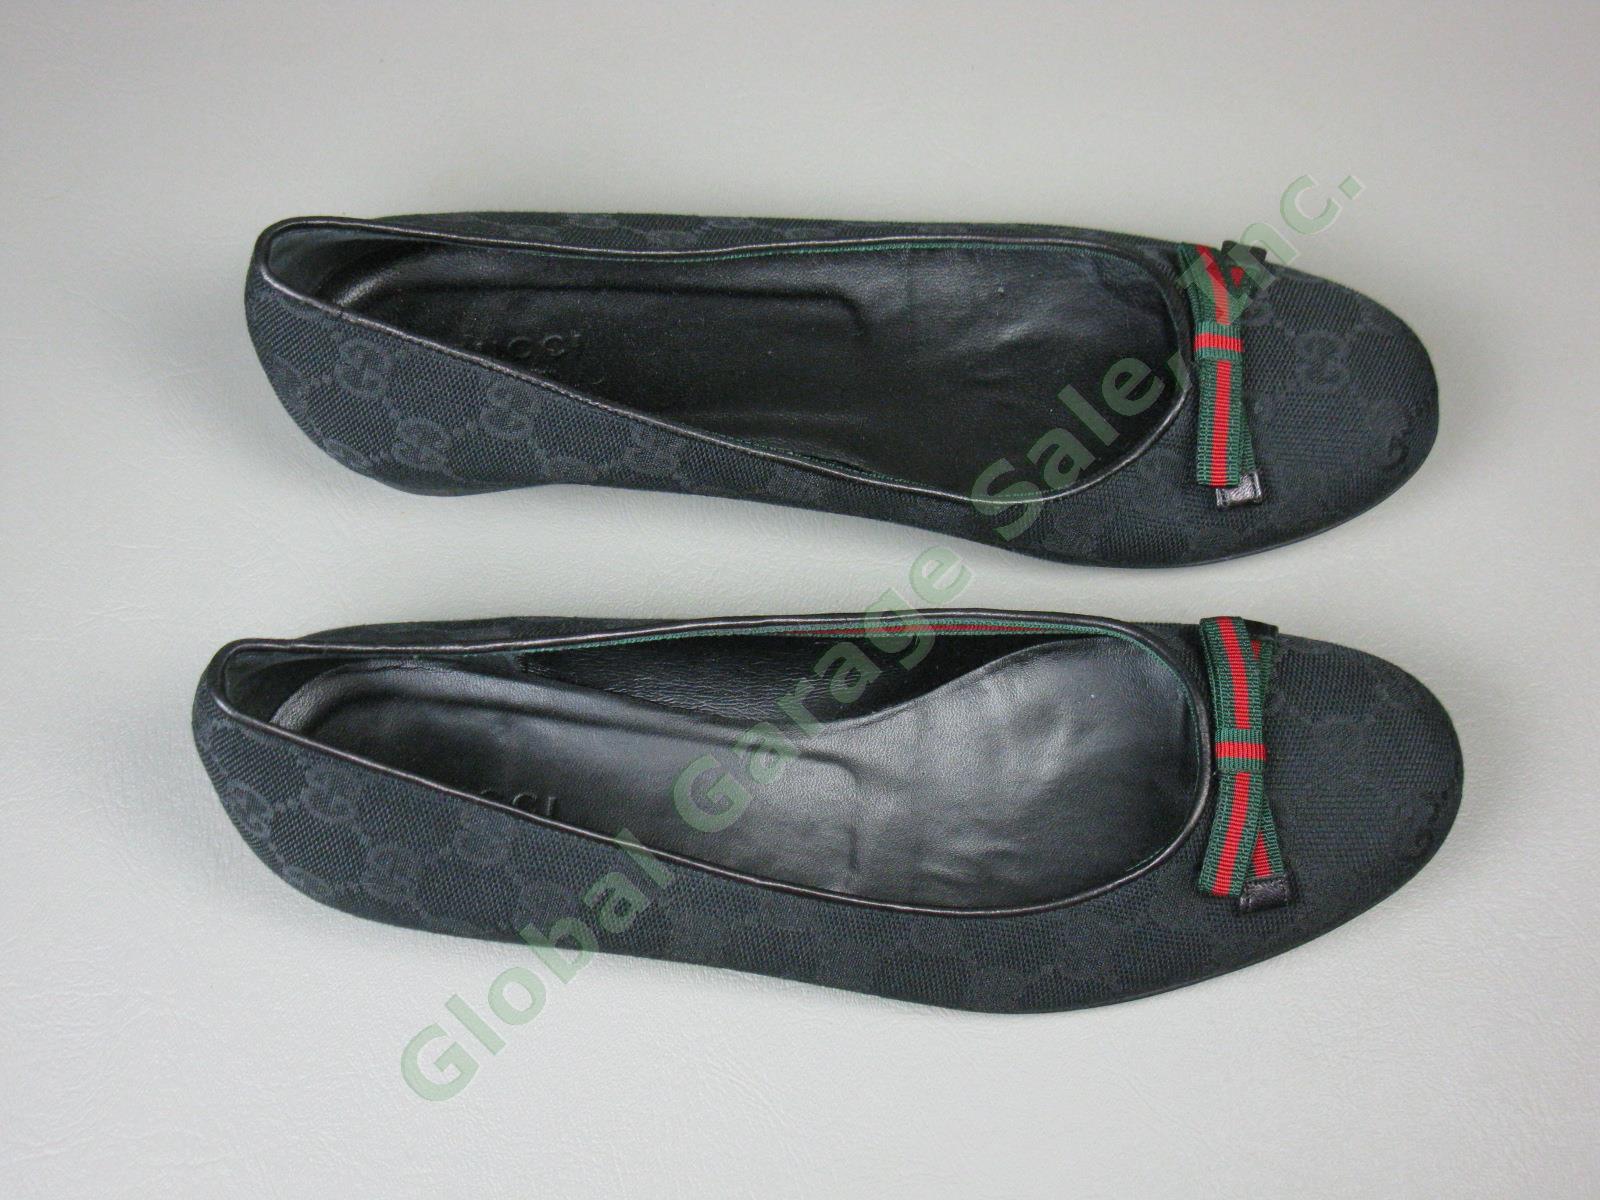 Womens Gucci Moca Tess S Cuoio Flats Size 7.5 Black One Owner With Box 161837 NR 7